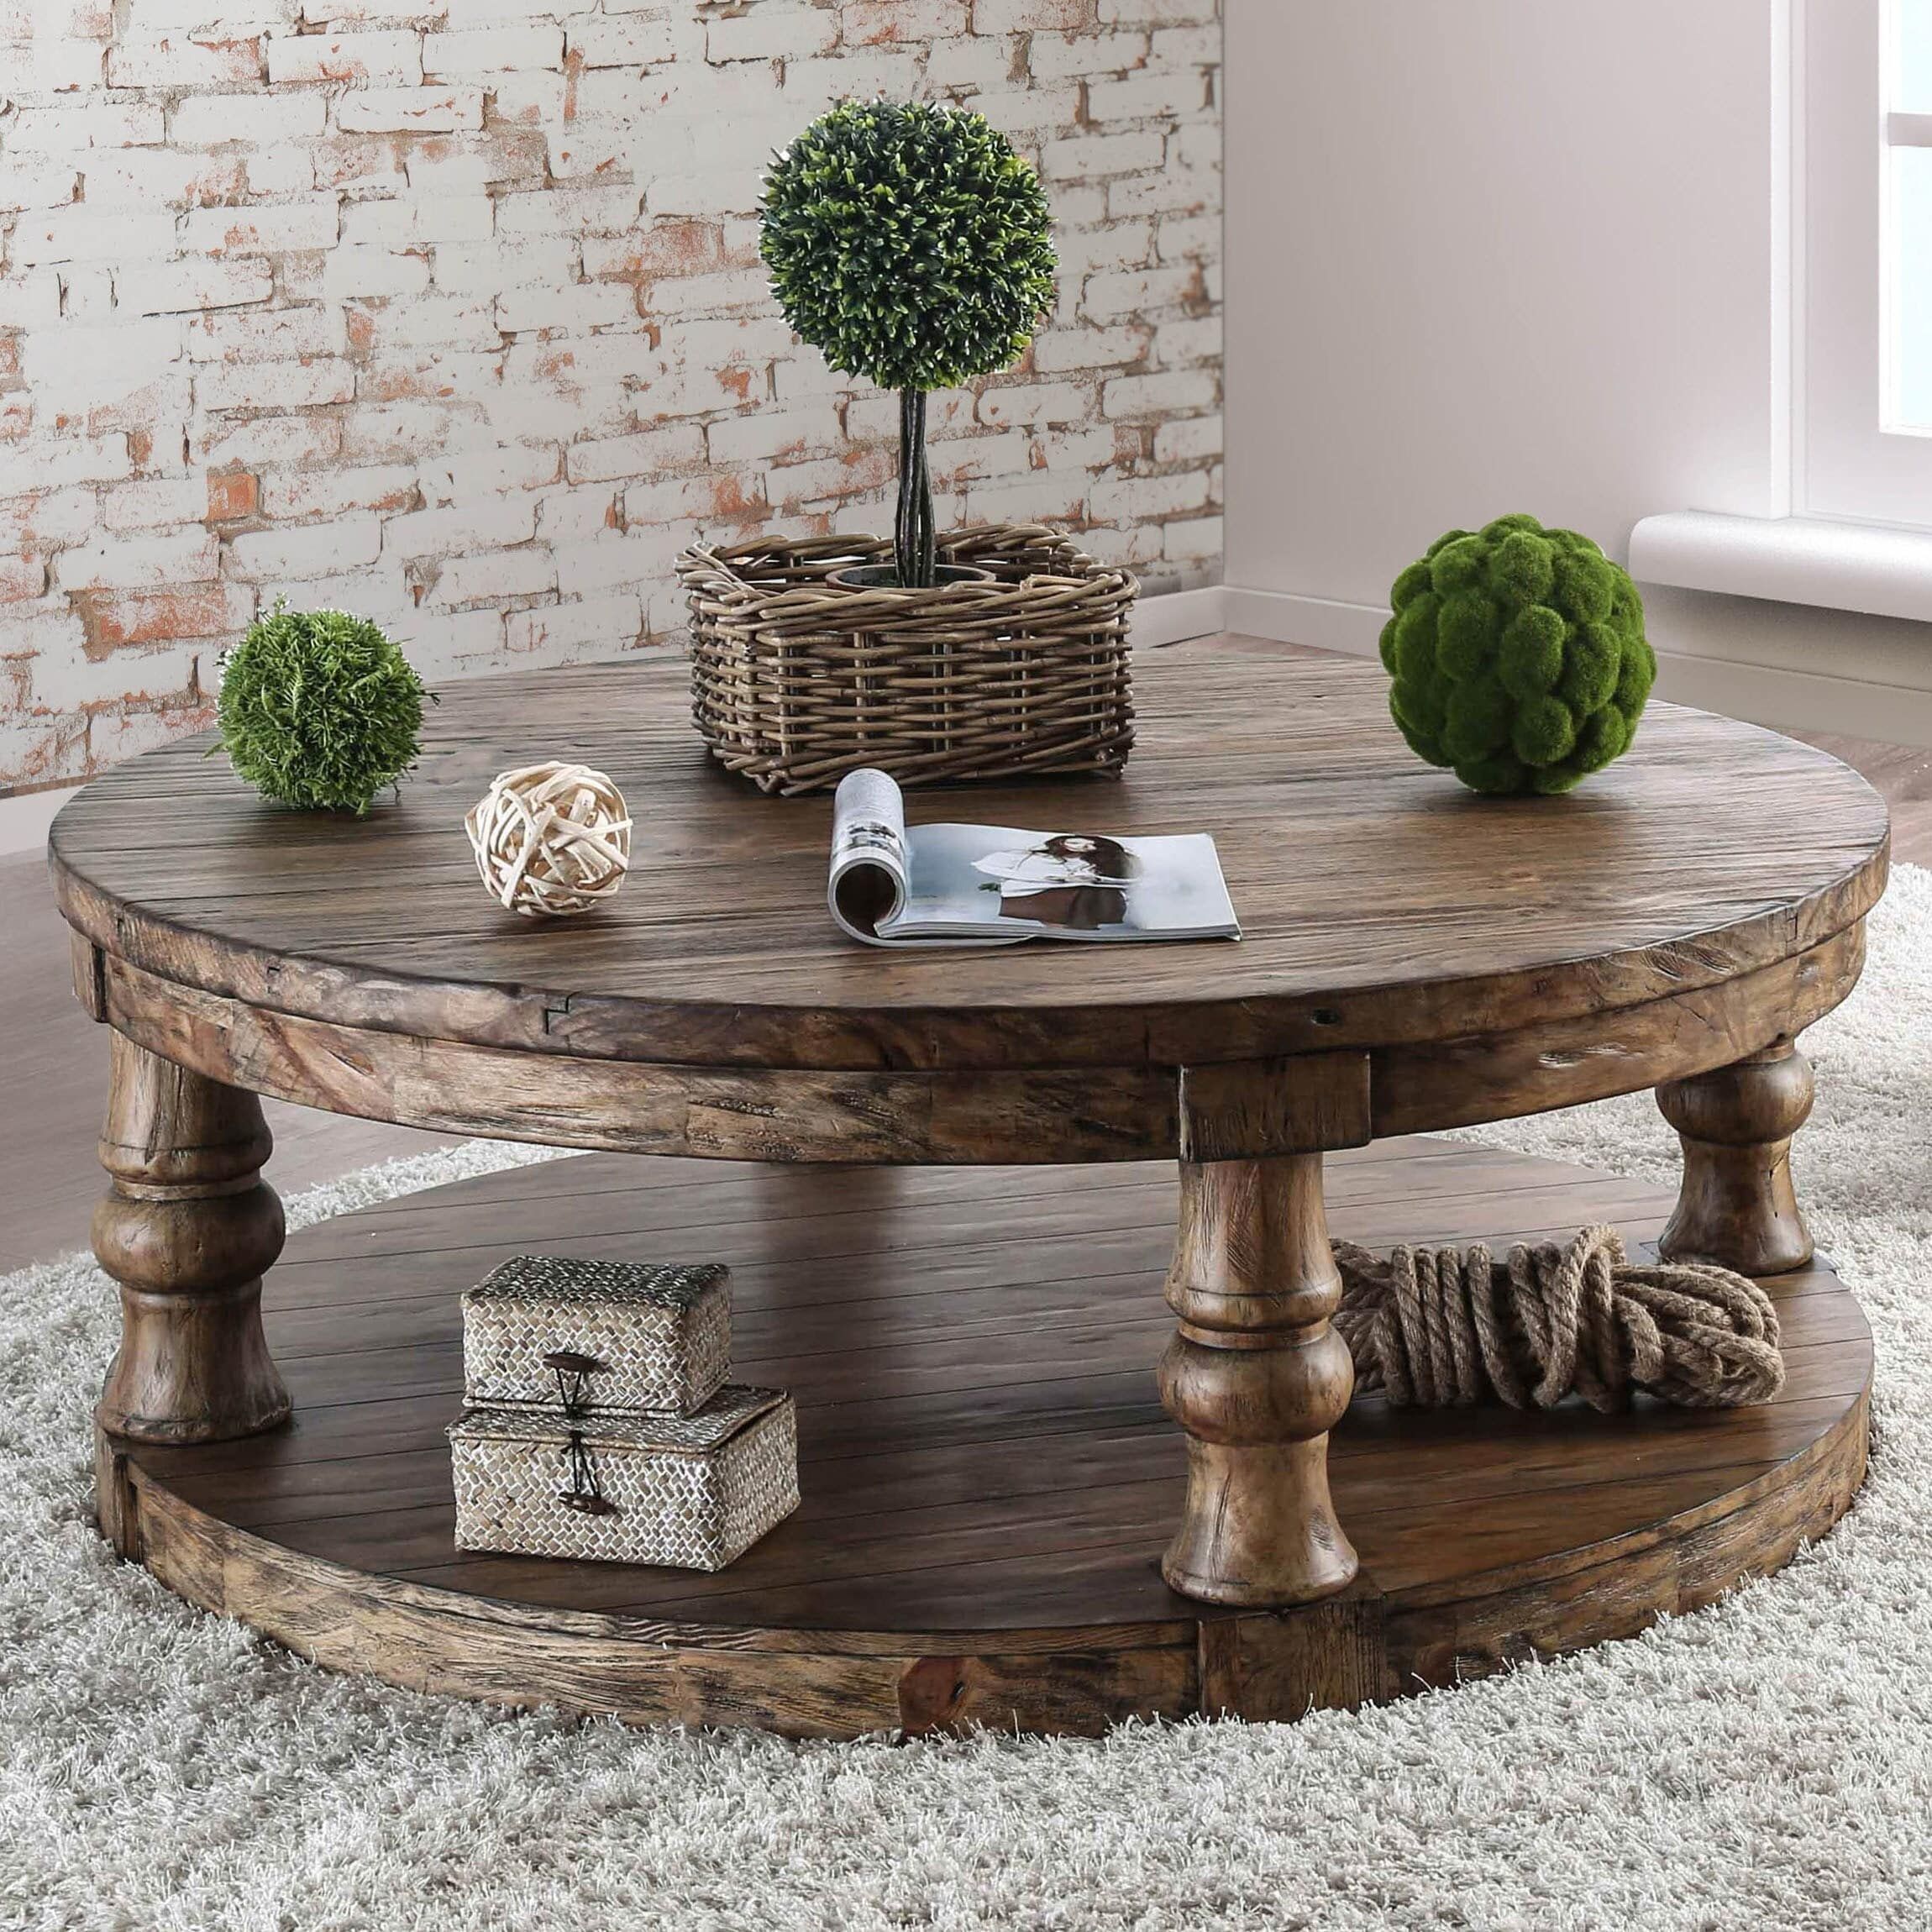 Round Rustic Coffee Table Sets – Rustic Coffee Tables That You Need To Intended For Rustic Coffee Tables (View 14 of 20)